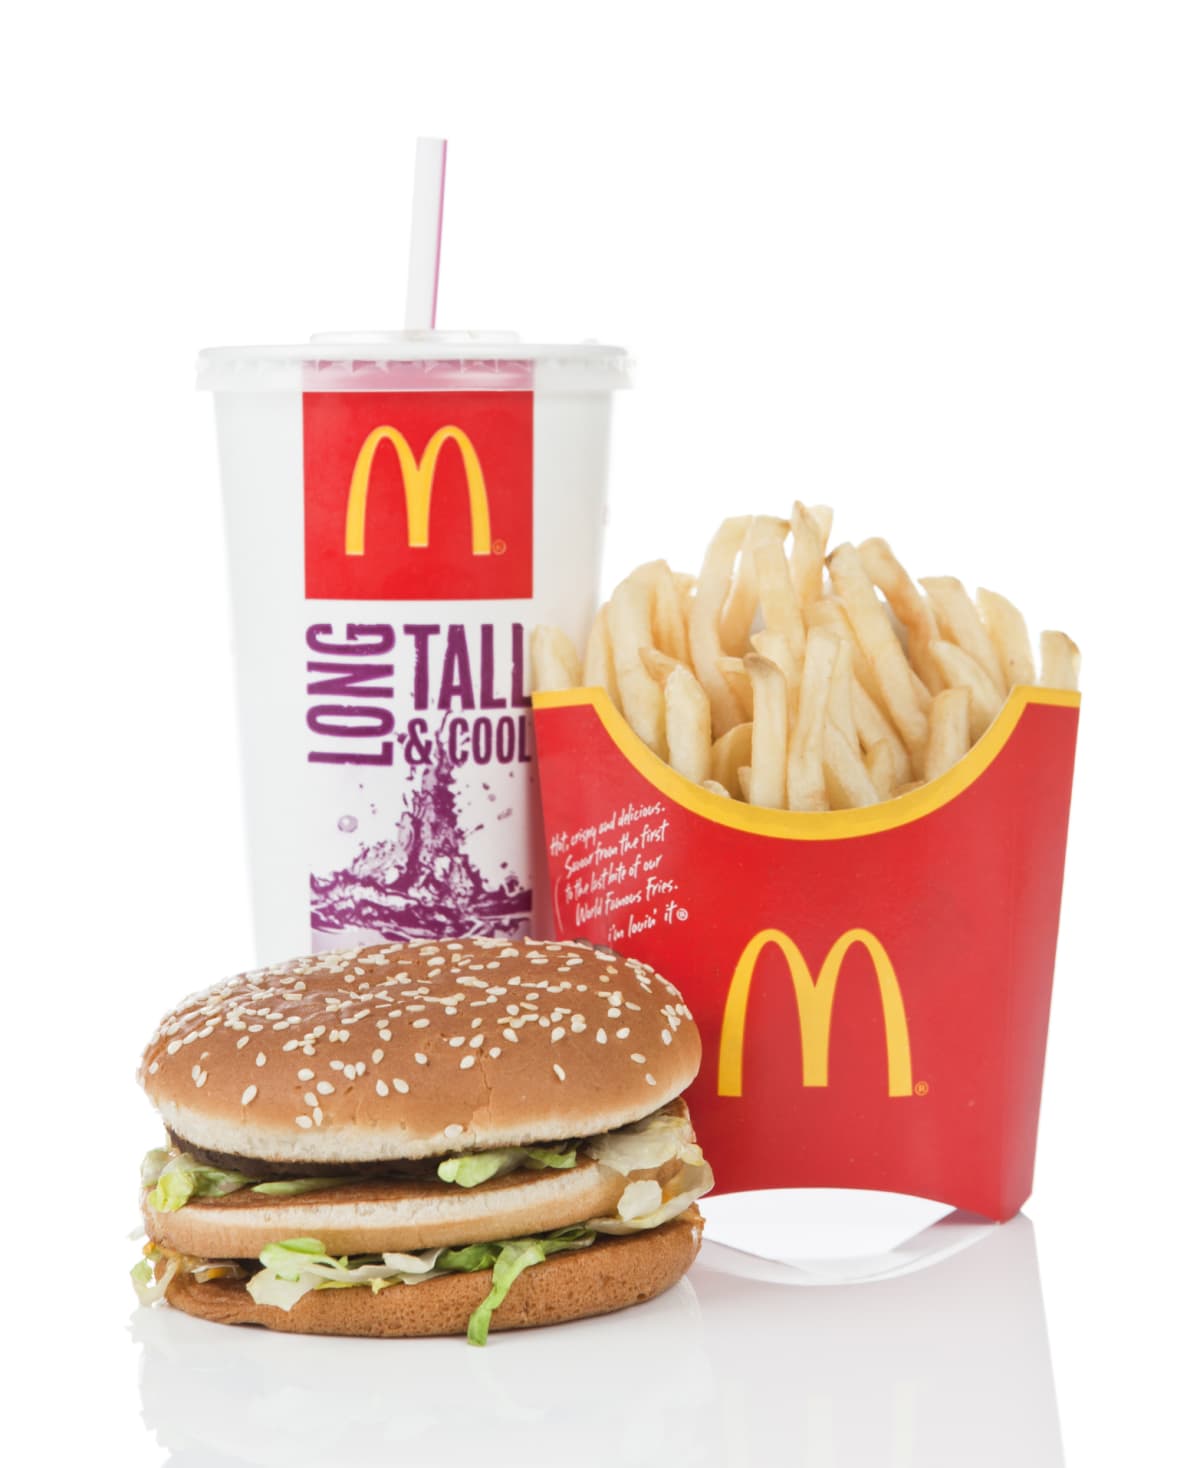 McDonald's meal including fries, burger, and drink